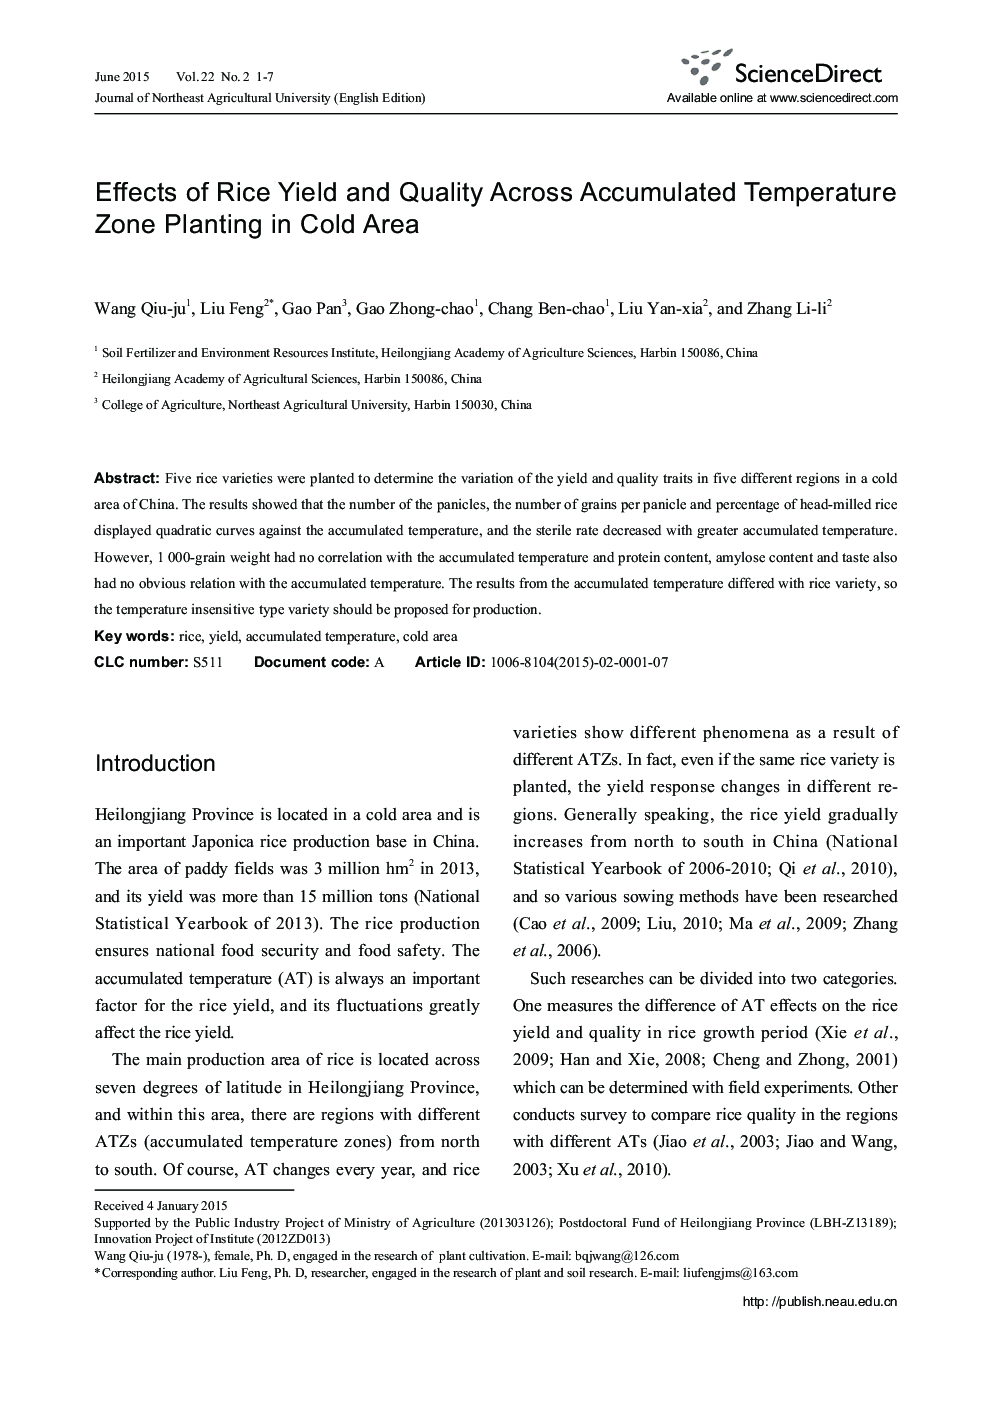 Effects of Rice Yield and Quality Across Accumulated Temperature Zone Planting in Cold Area 